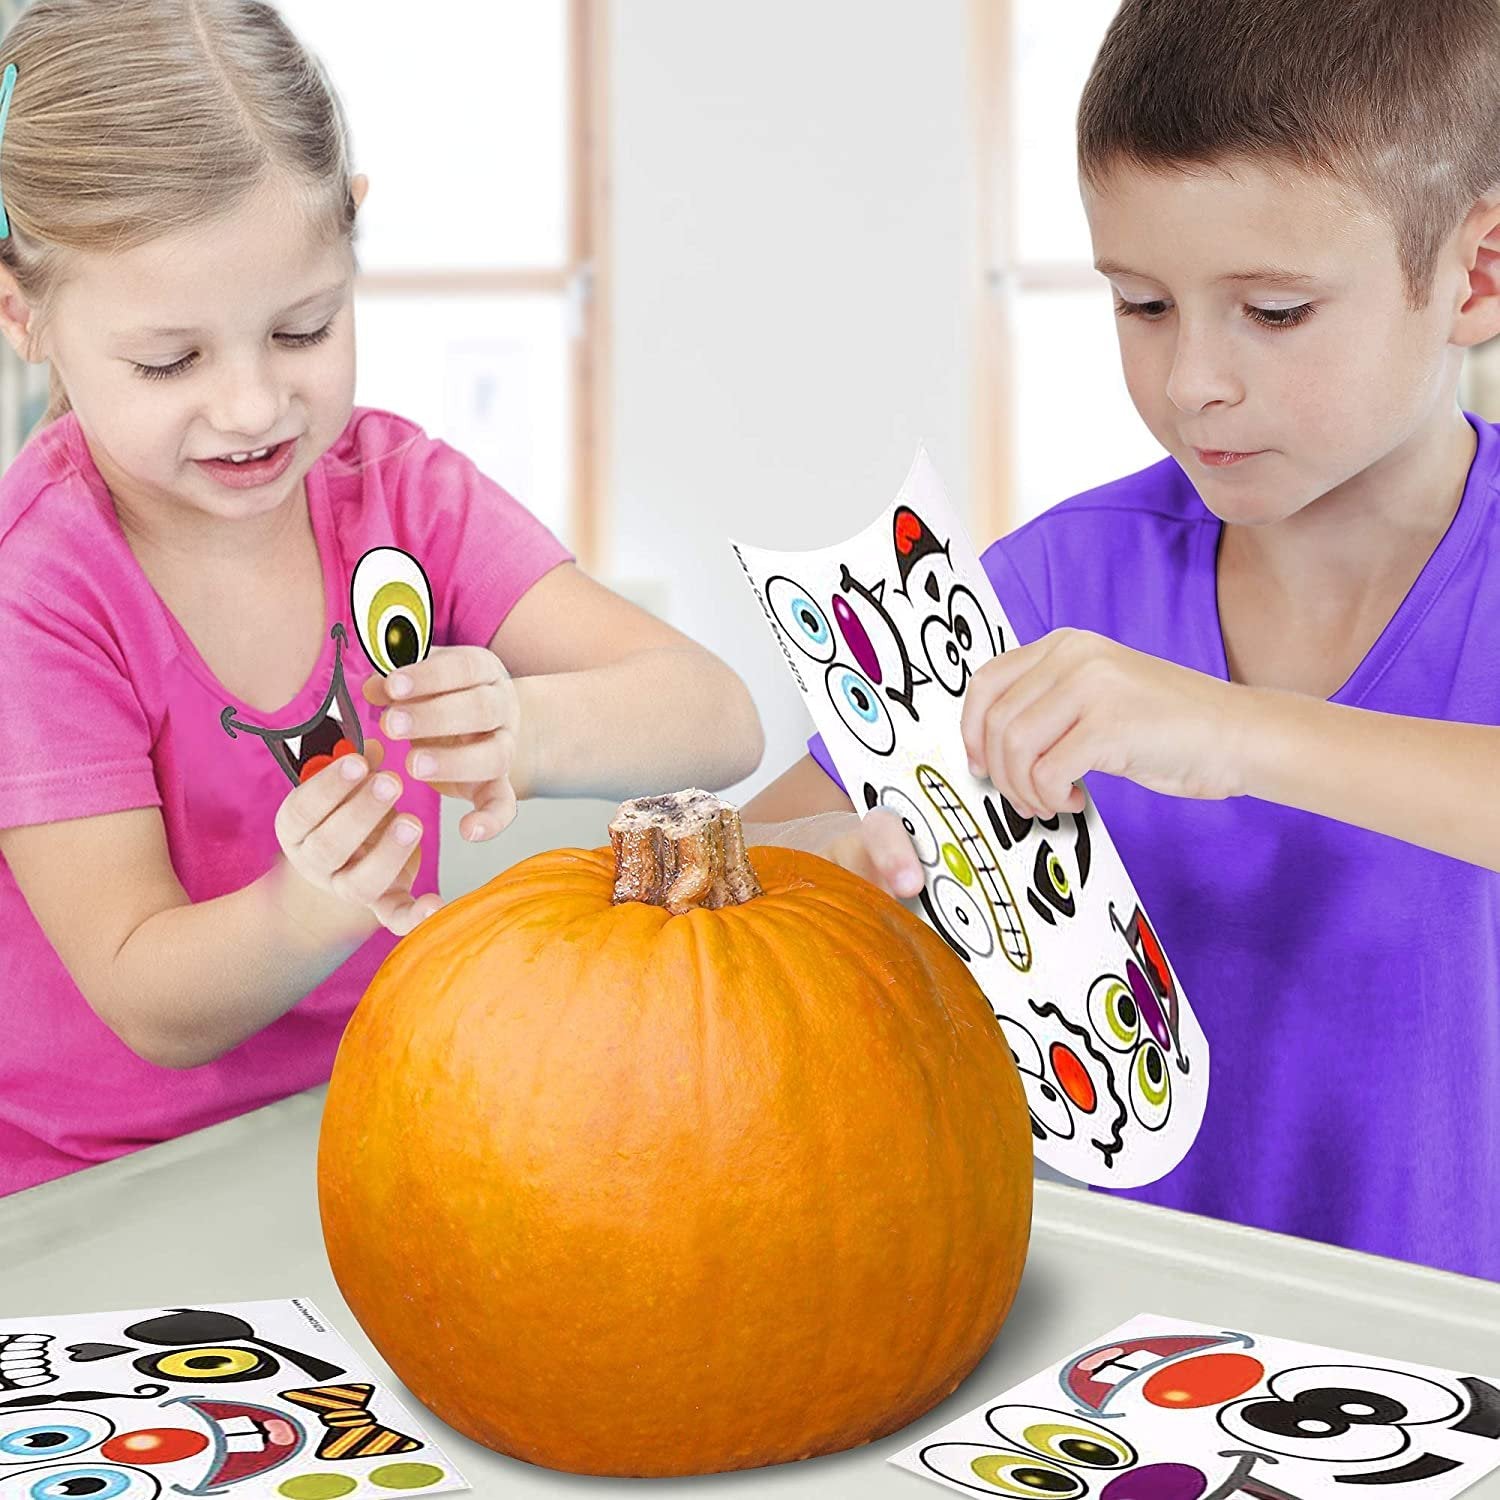 Halloween Pumpkin Decorating Stickers - 24 Large Sheets - Jack-o-Lantern Decoration Kit - 52 Total Face Stickers - Cute Halloween Decor Idea - Treats, Gifts, and Crafts for Kids- 6" x 9"